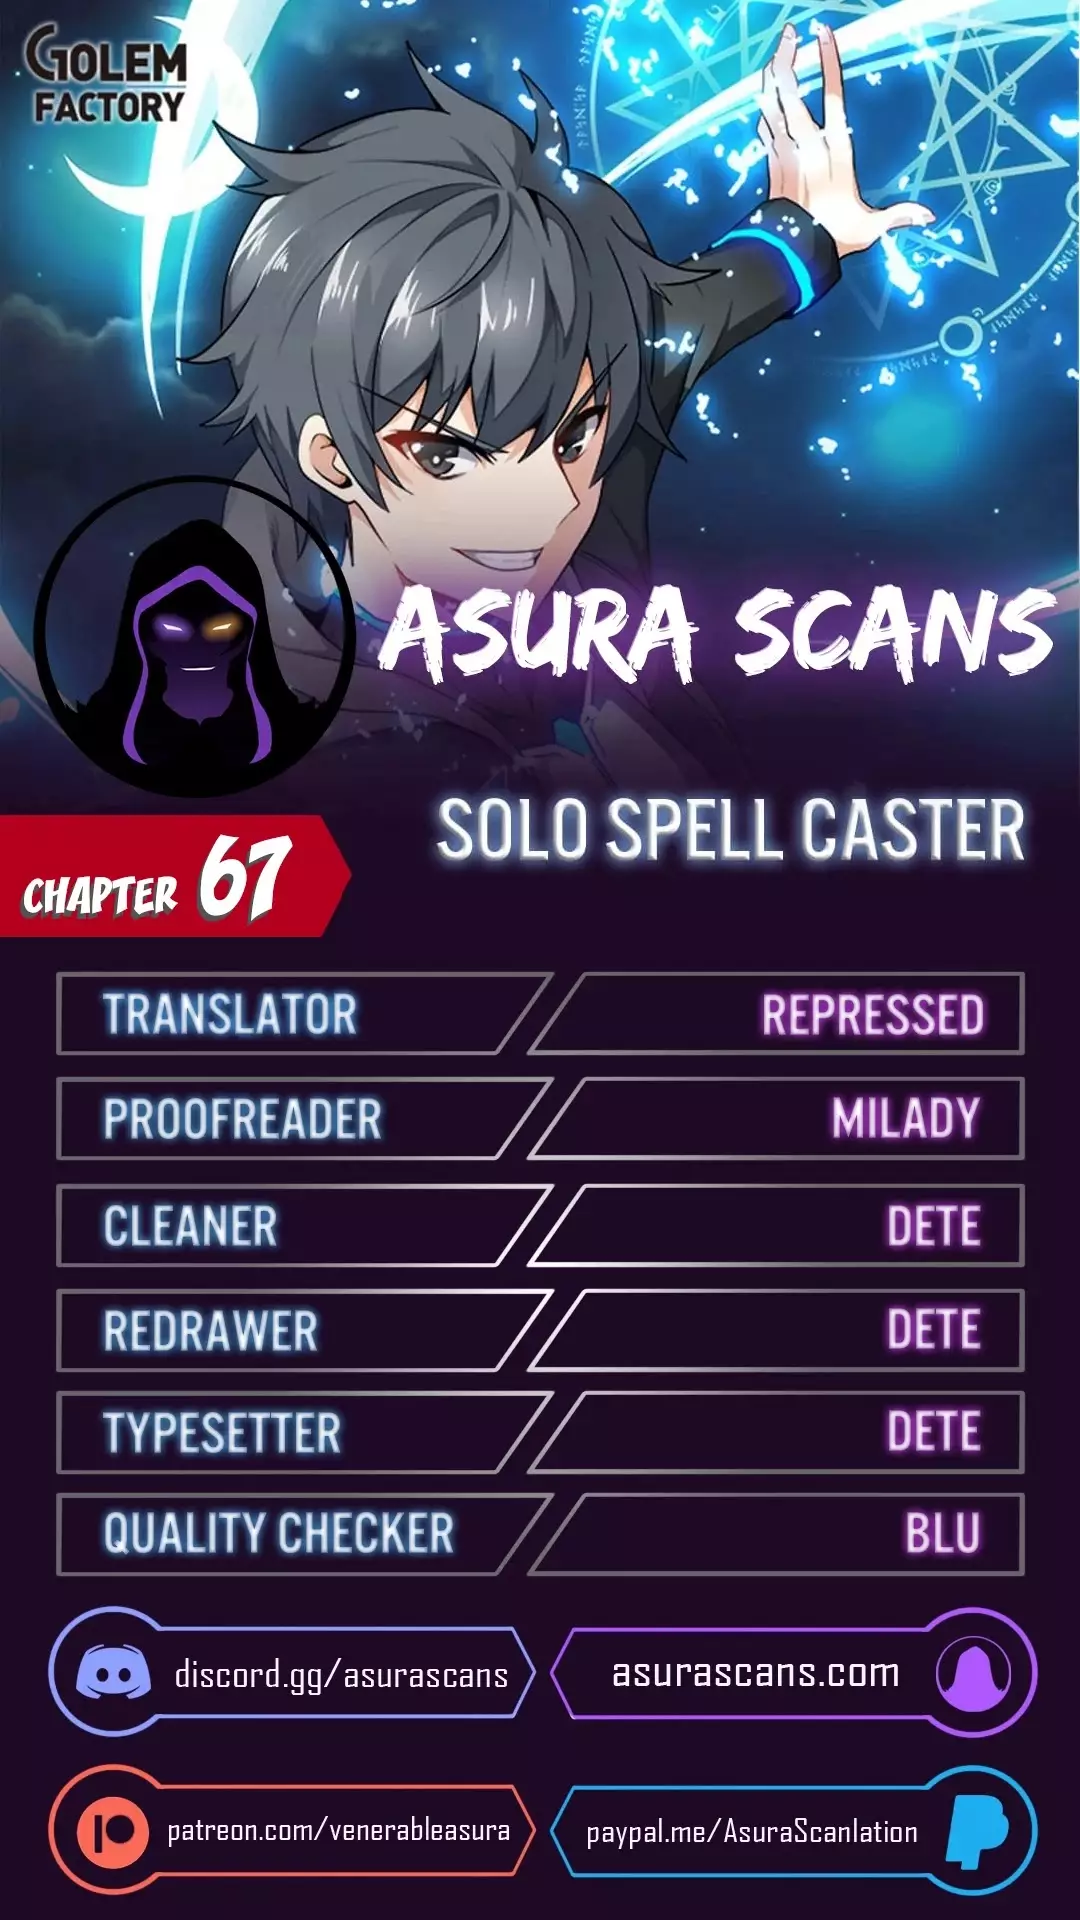 Solo Spell Caster - 67 page 1